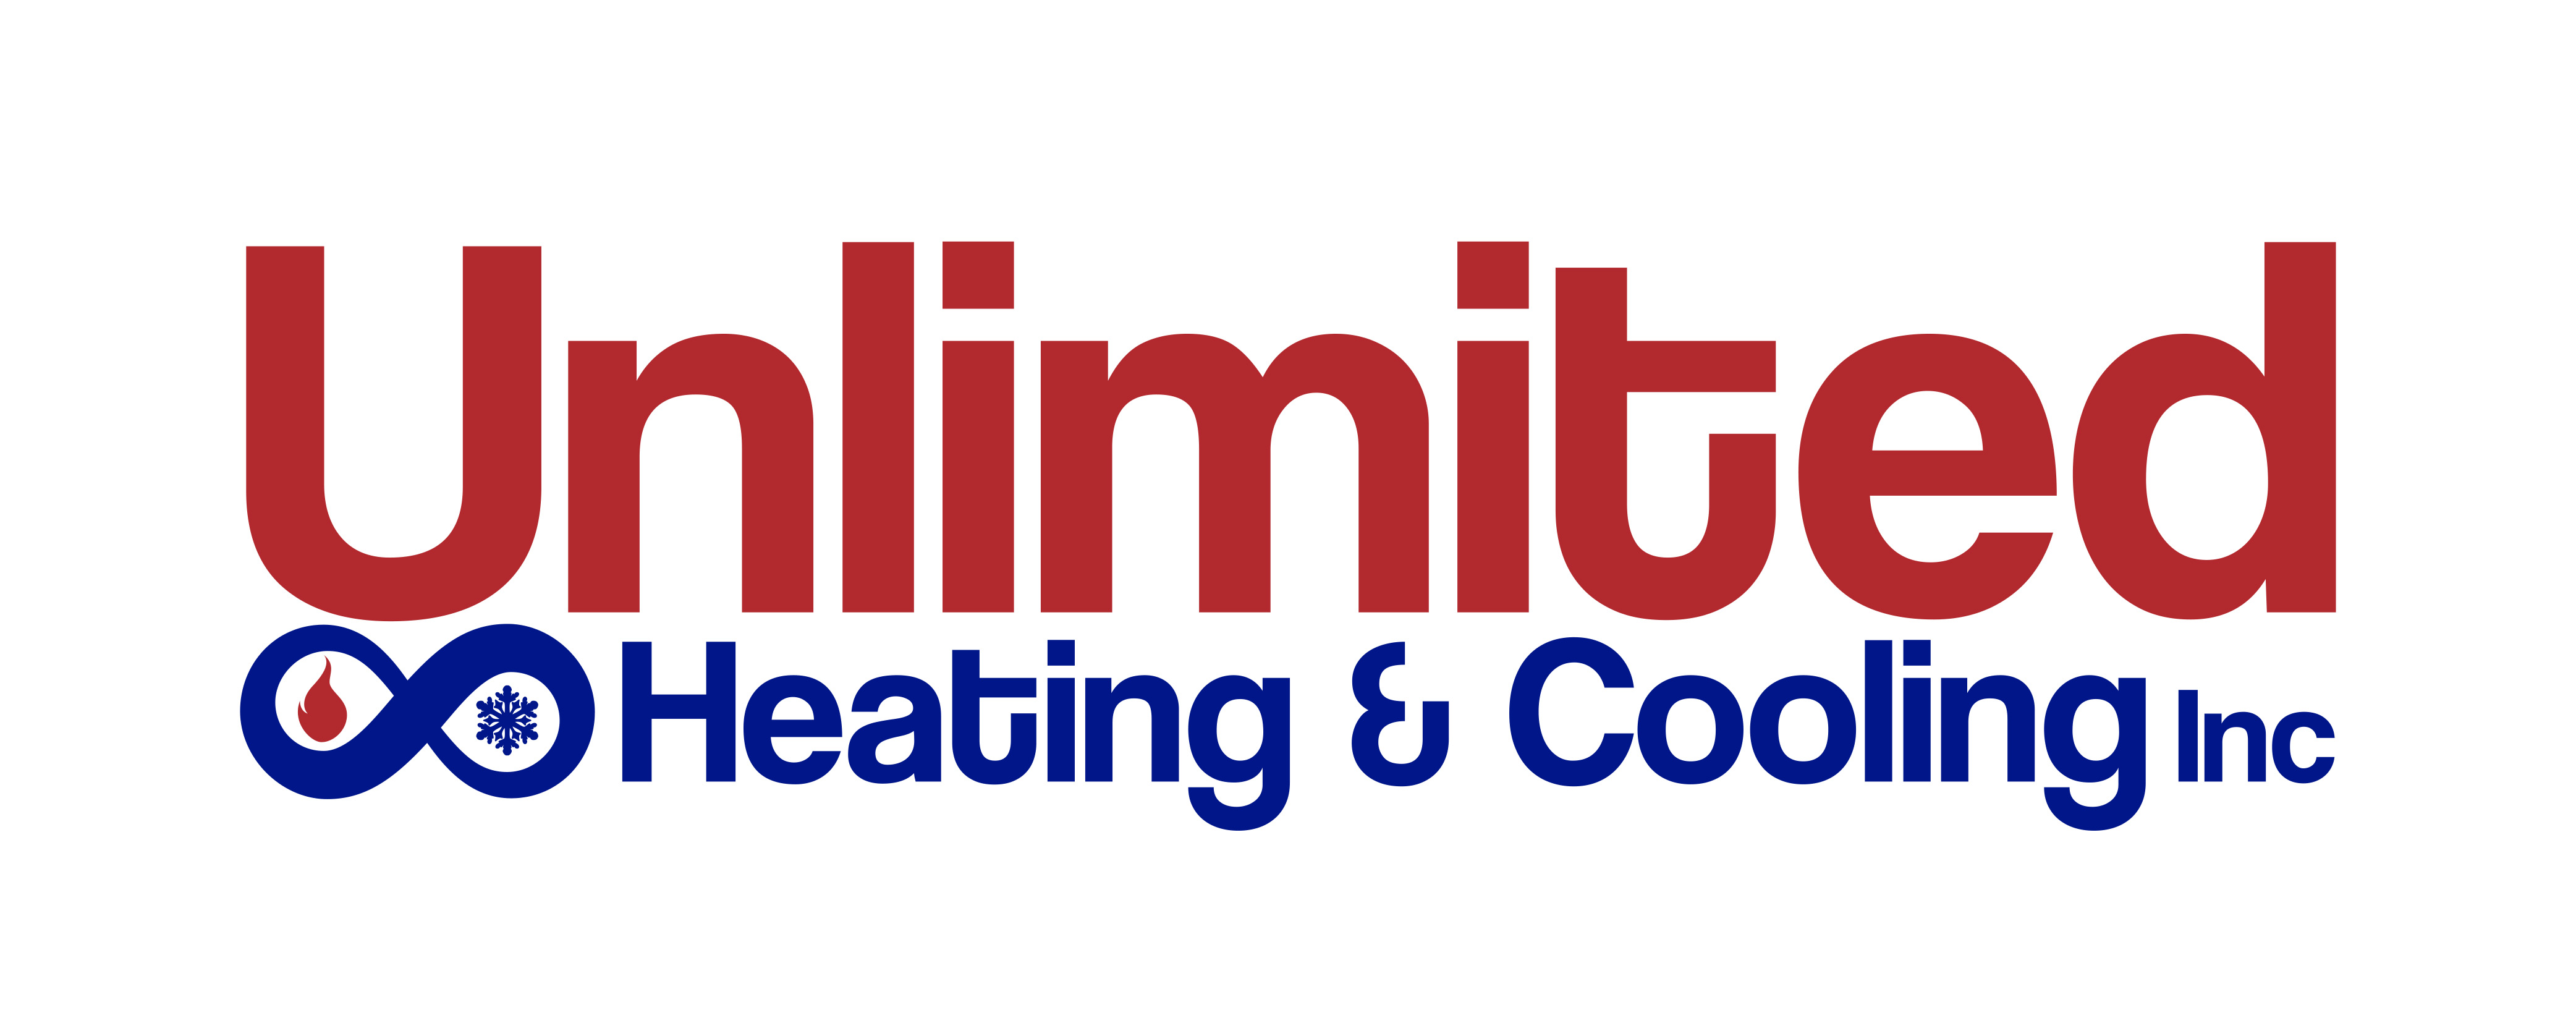 Unlimited Heating & Cooling Inc.